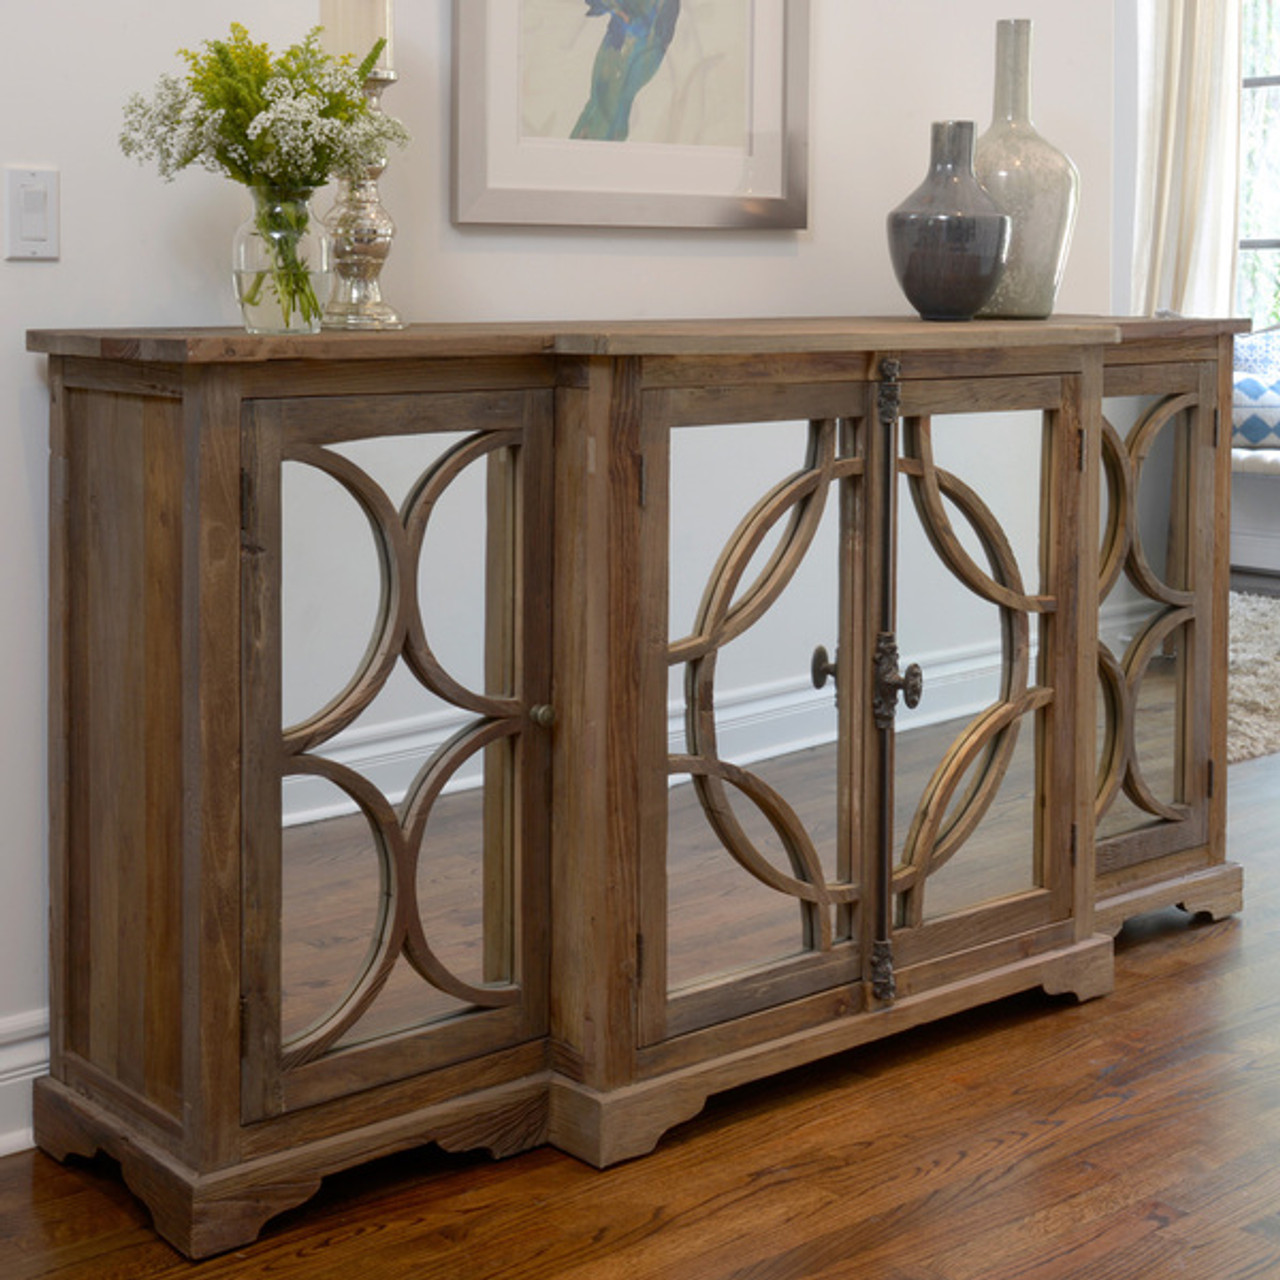 Reclaimed Wood Credenzas And Sideboards